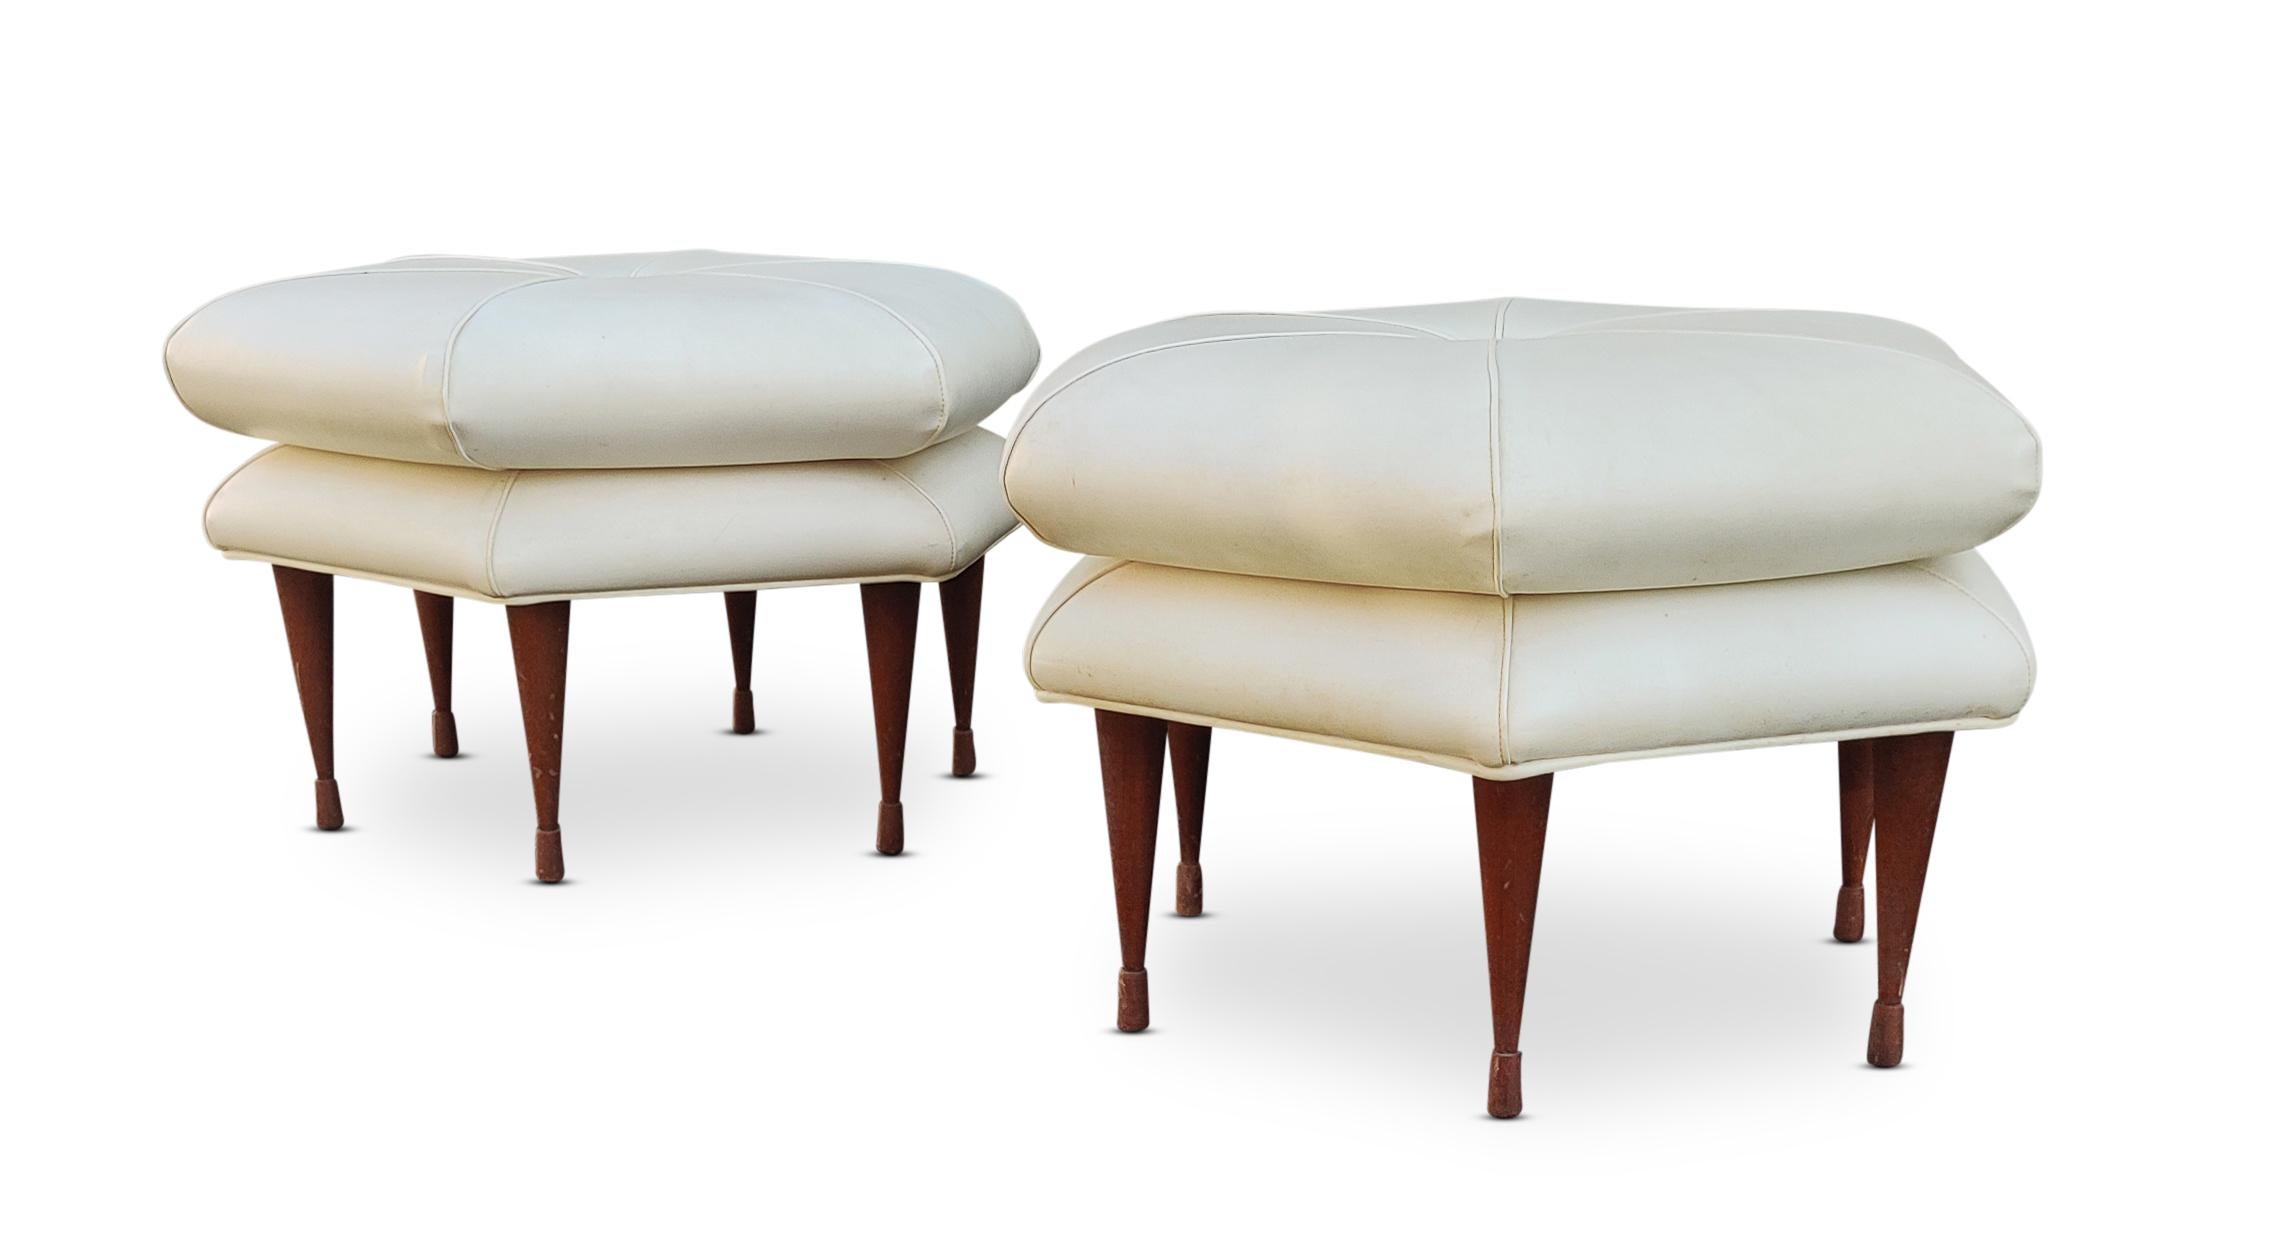 Mid-Century Modern Pair of Selig Hexagon Form Ottoman or Pouffe Original Leatherette on Walnut Legs For Sale